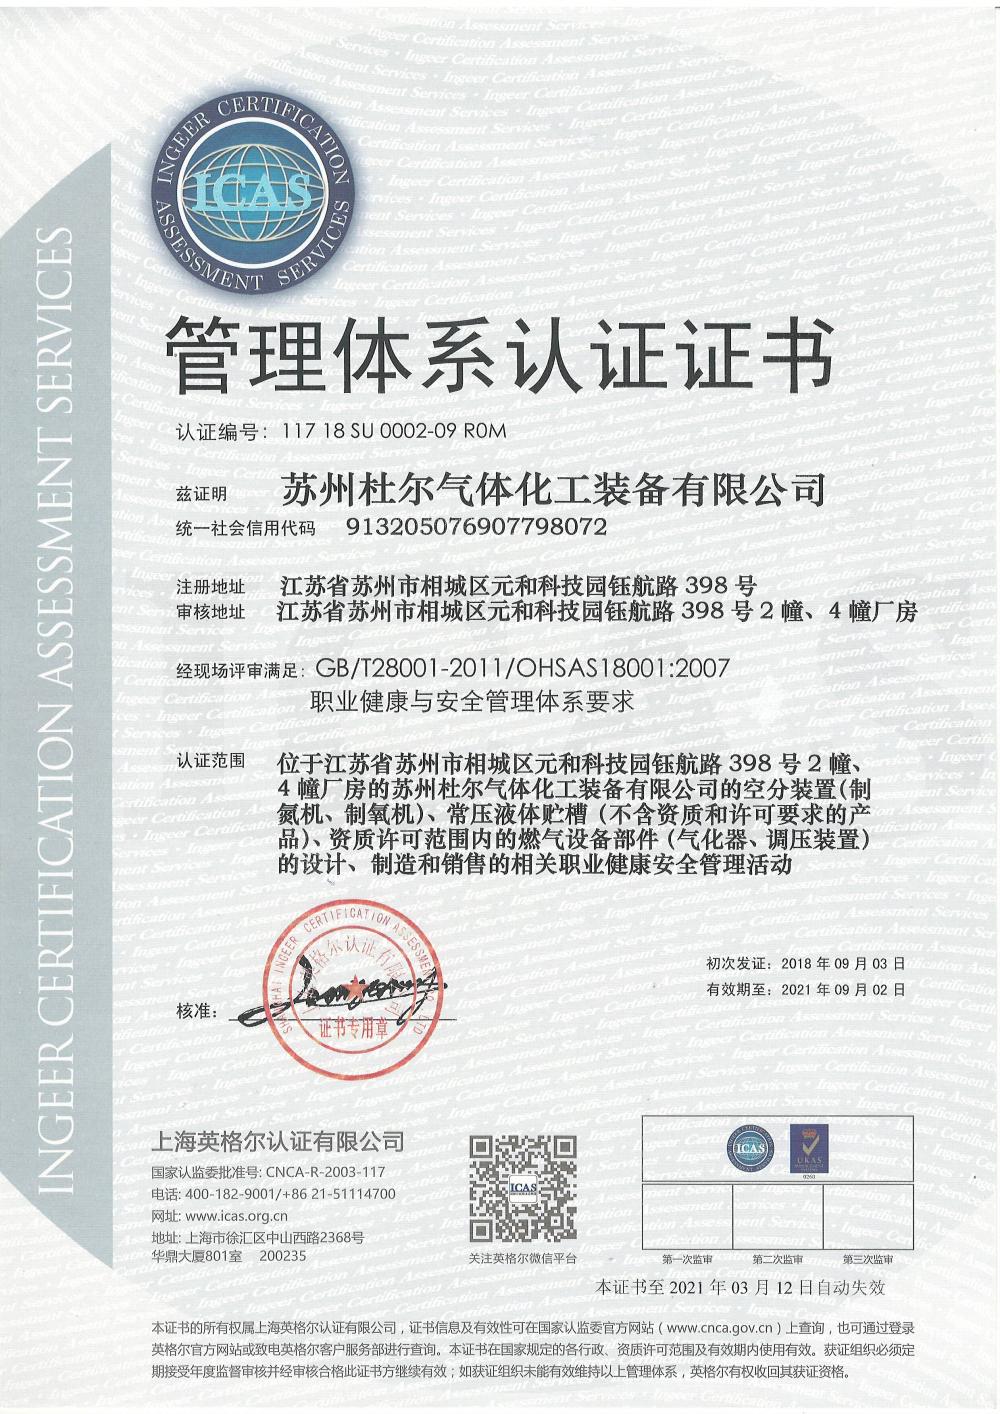 Occupational Health and Safety certificate